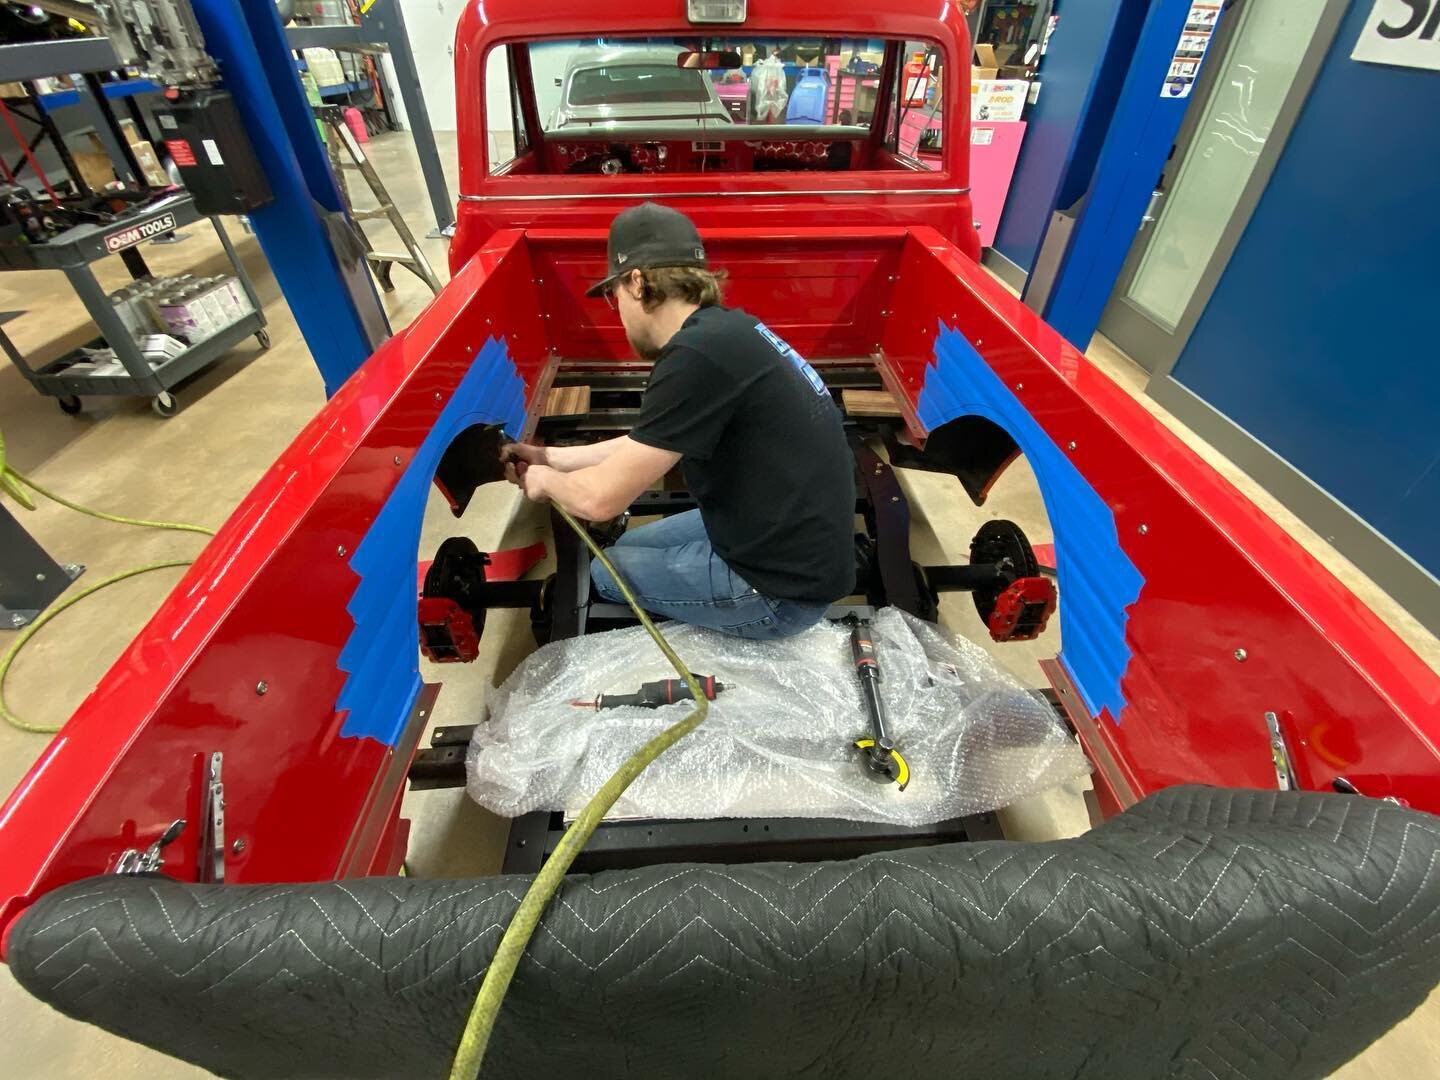 Keenan is making room for  wider wheel and tire combo on this step side c10. He narrowed a set of steel tubs that will bolt in like factory over the wood bed. #hardworkpaysoff #gofastorgohome #keenan #nash #hons #1969 #c10 #chevrolet #fabshop #fabric